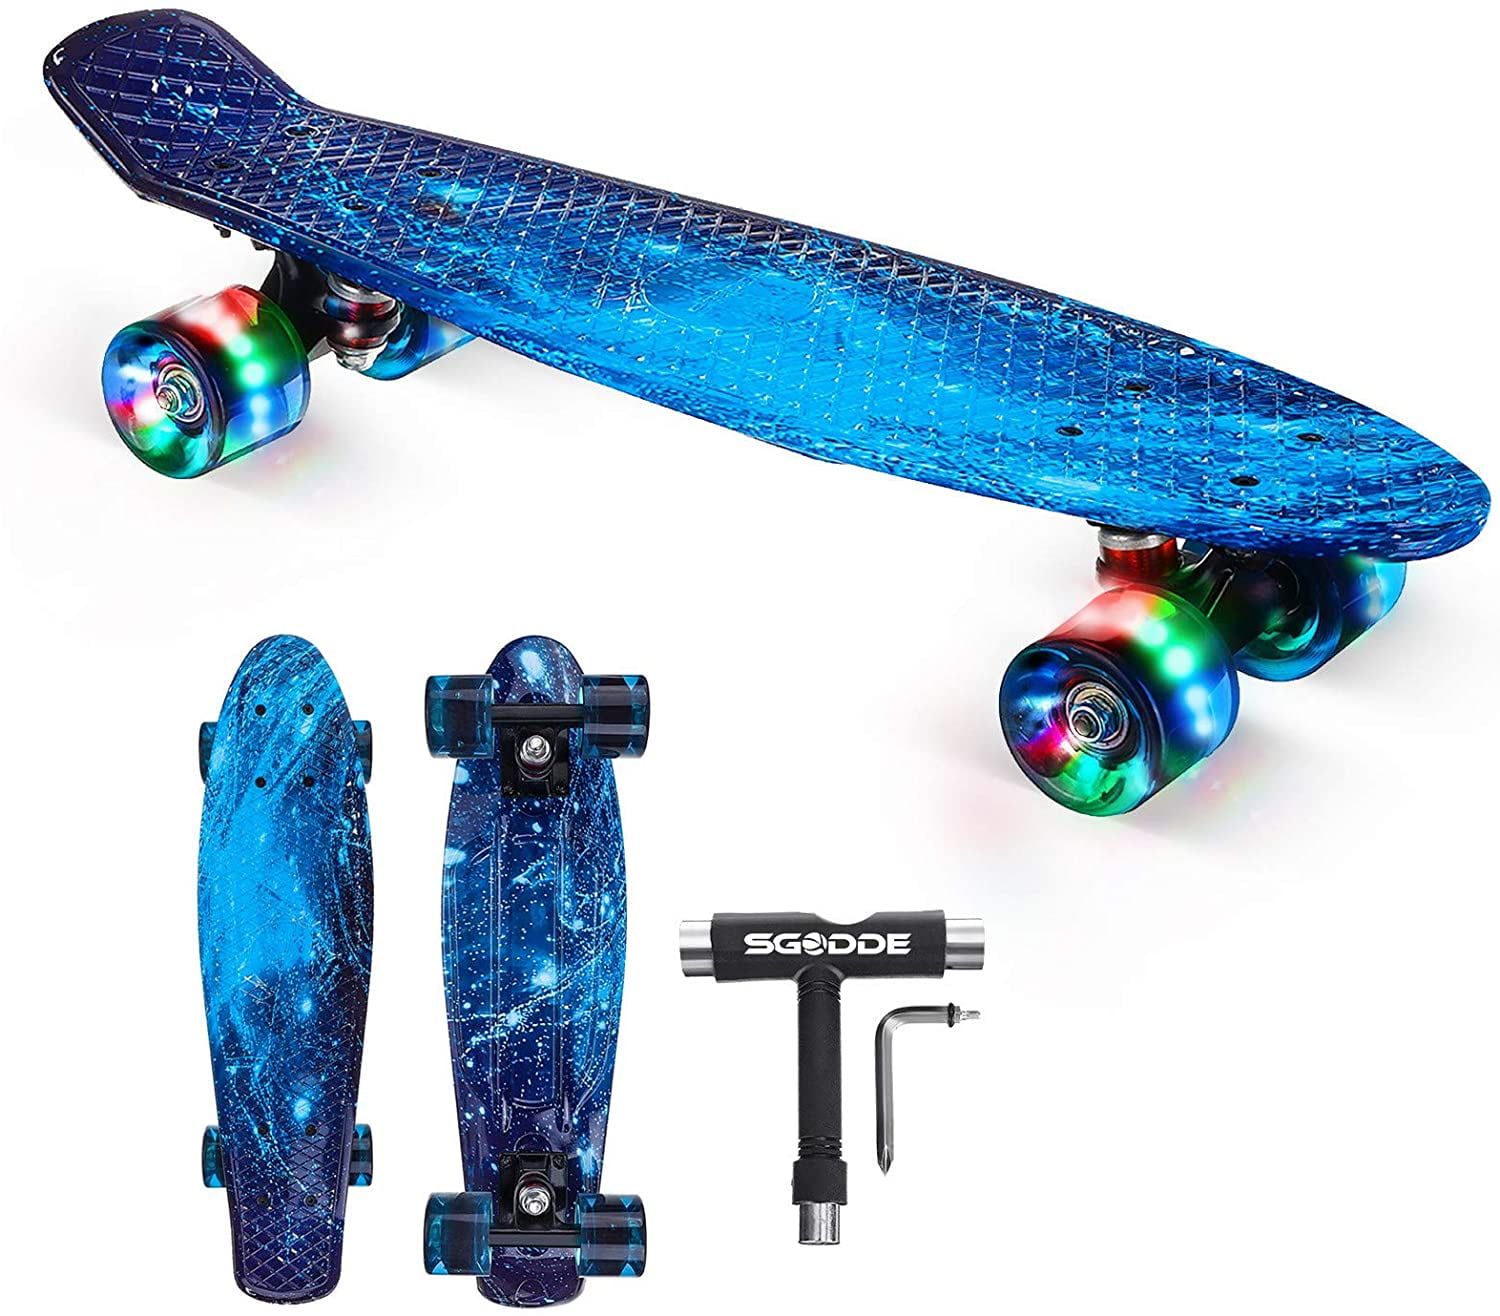 Details about   22 Inch Complete Mini Cruiser Skateboard with LED Light Up Wheels 60mm,82A 